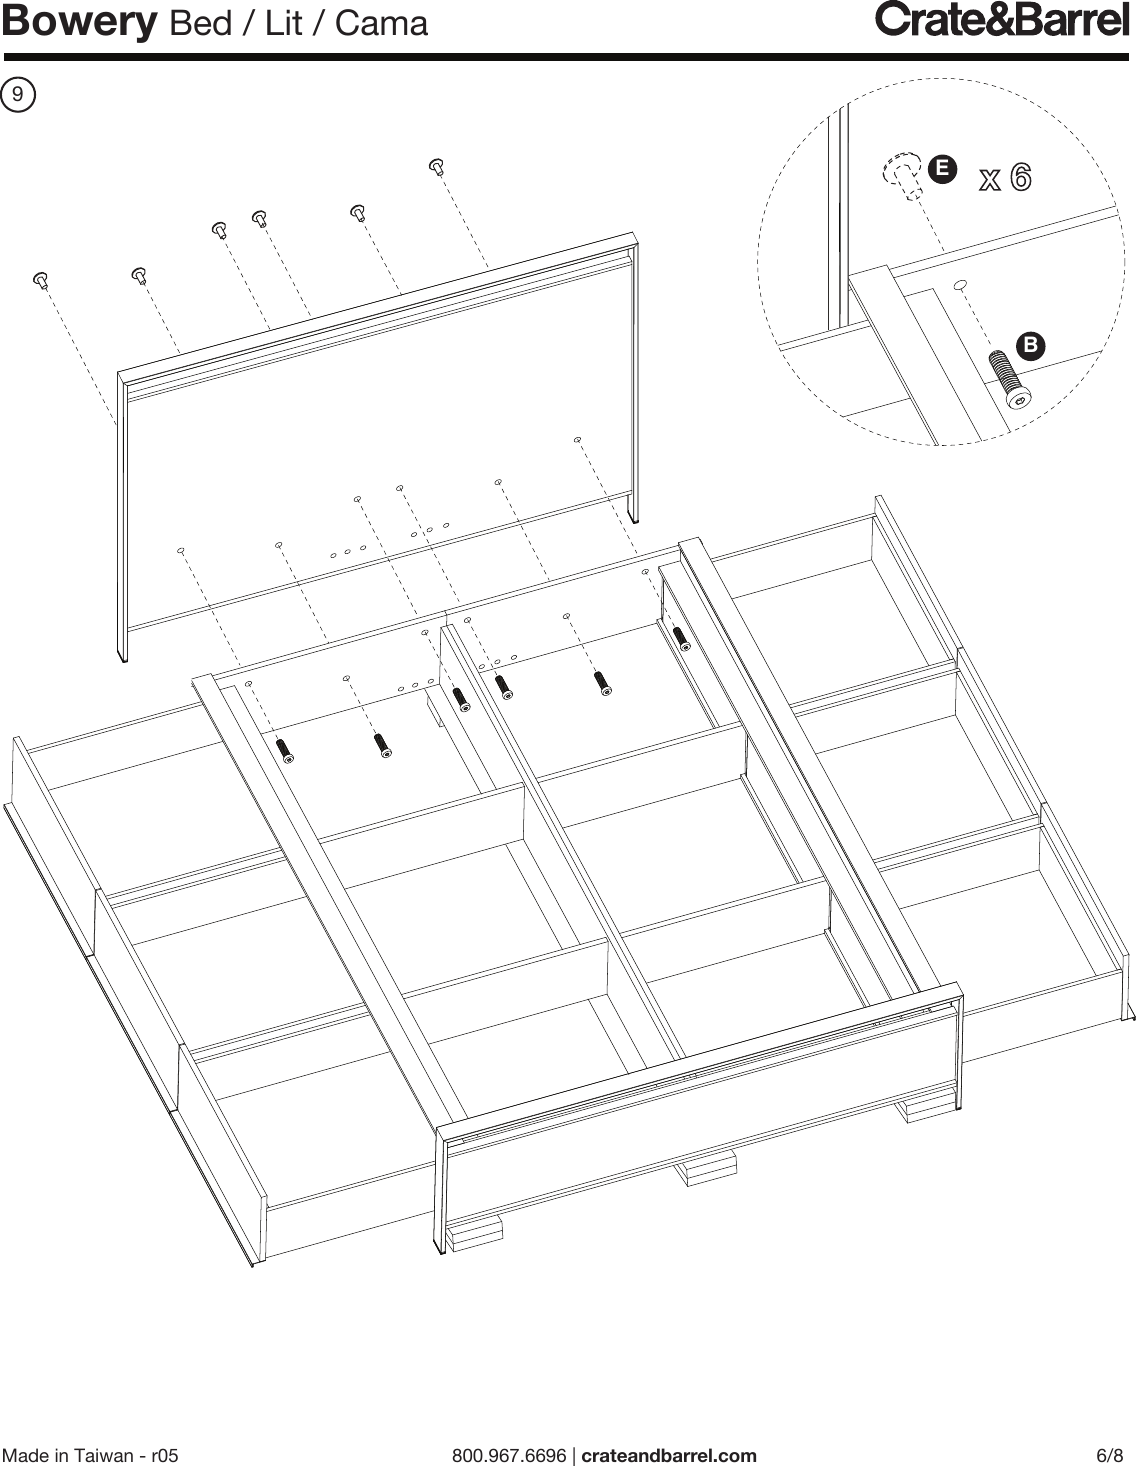 Page 6 of 8 - Crate-Barrel 304-Bowery-Bed-Ml Bowery Bed ML Assembly Instructions From Crate And Barrel